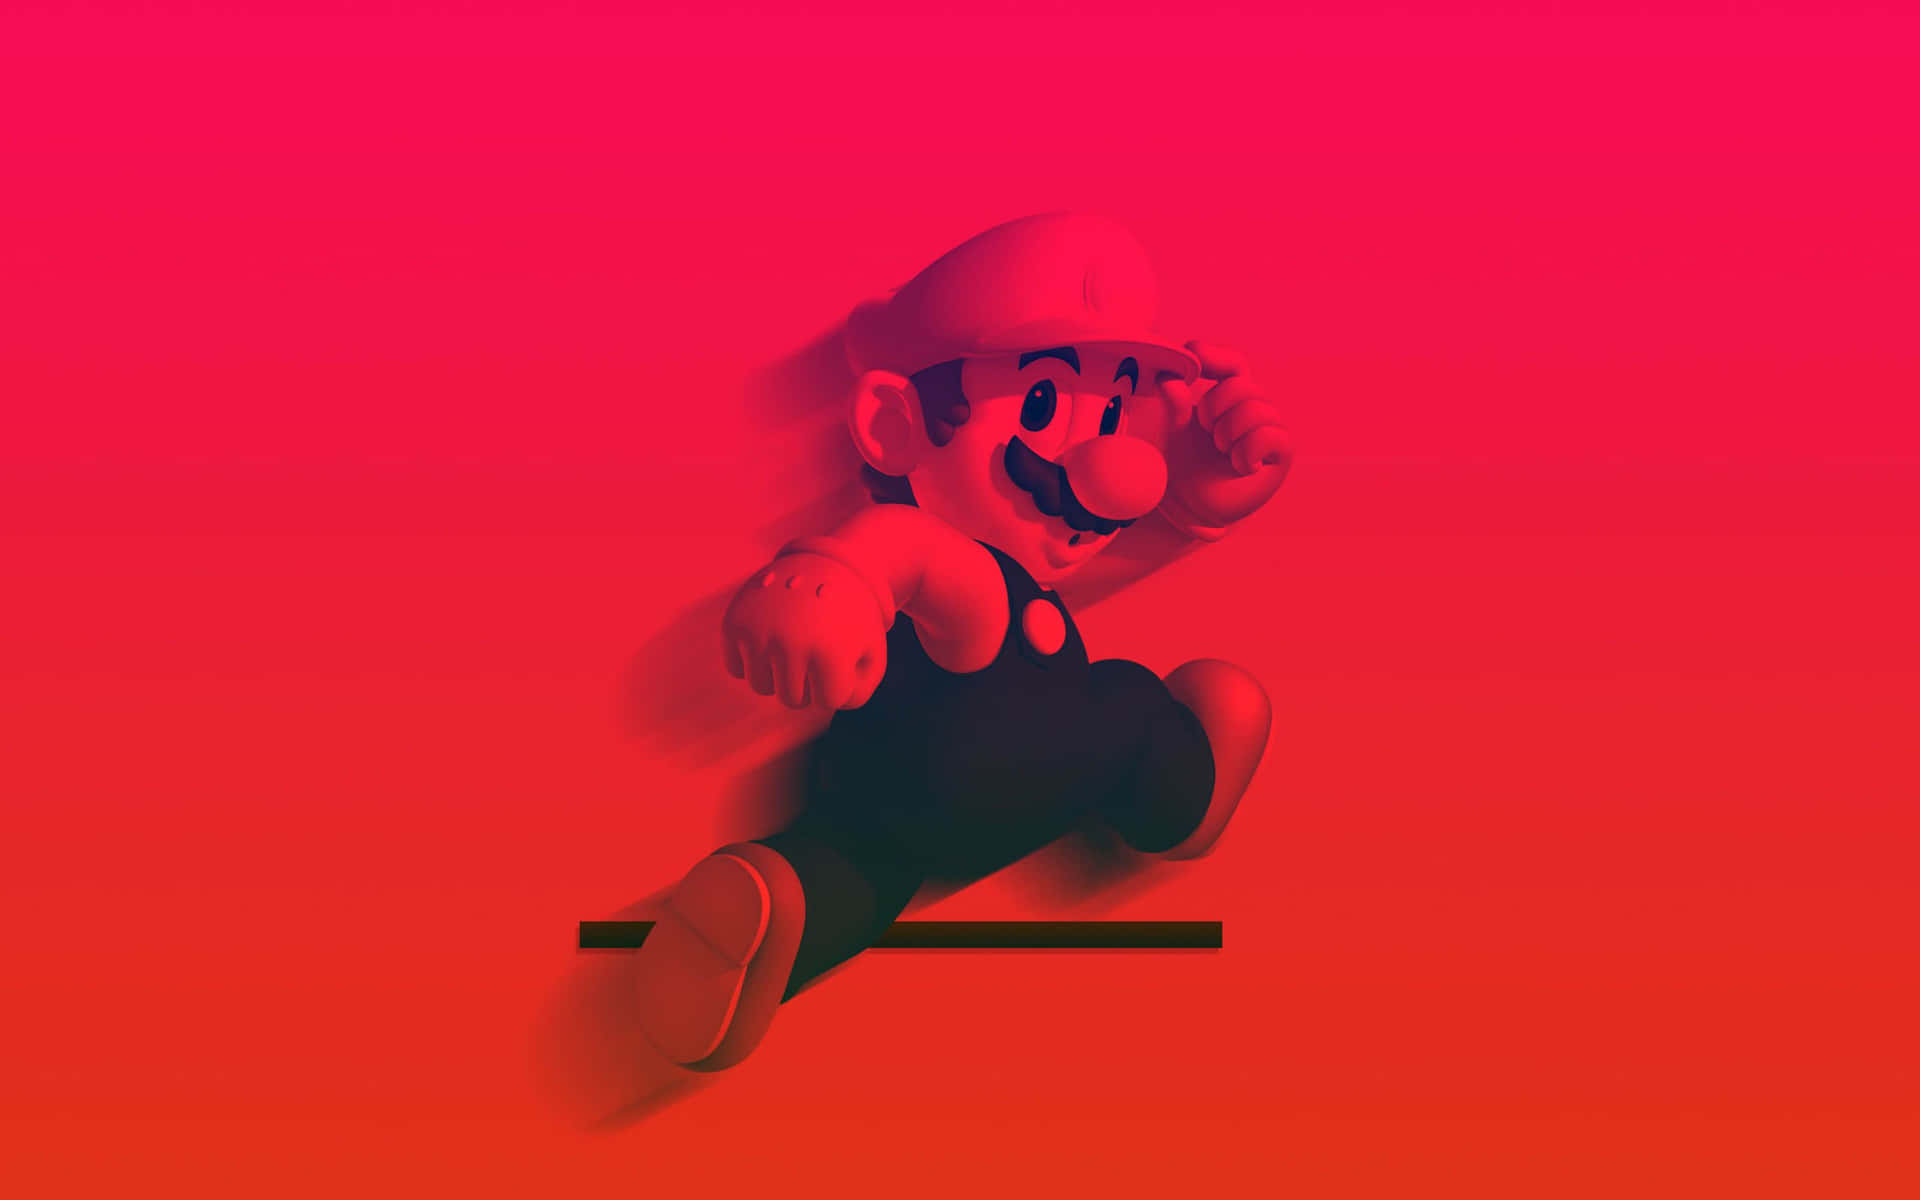 Get Ready To Explore The Mushroom Kingdom With Cool Mario! Background